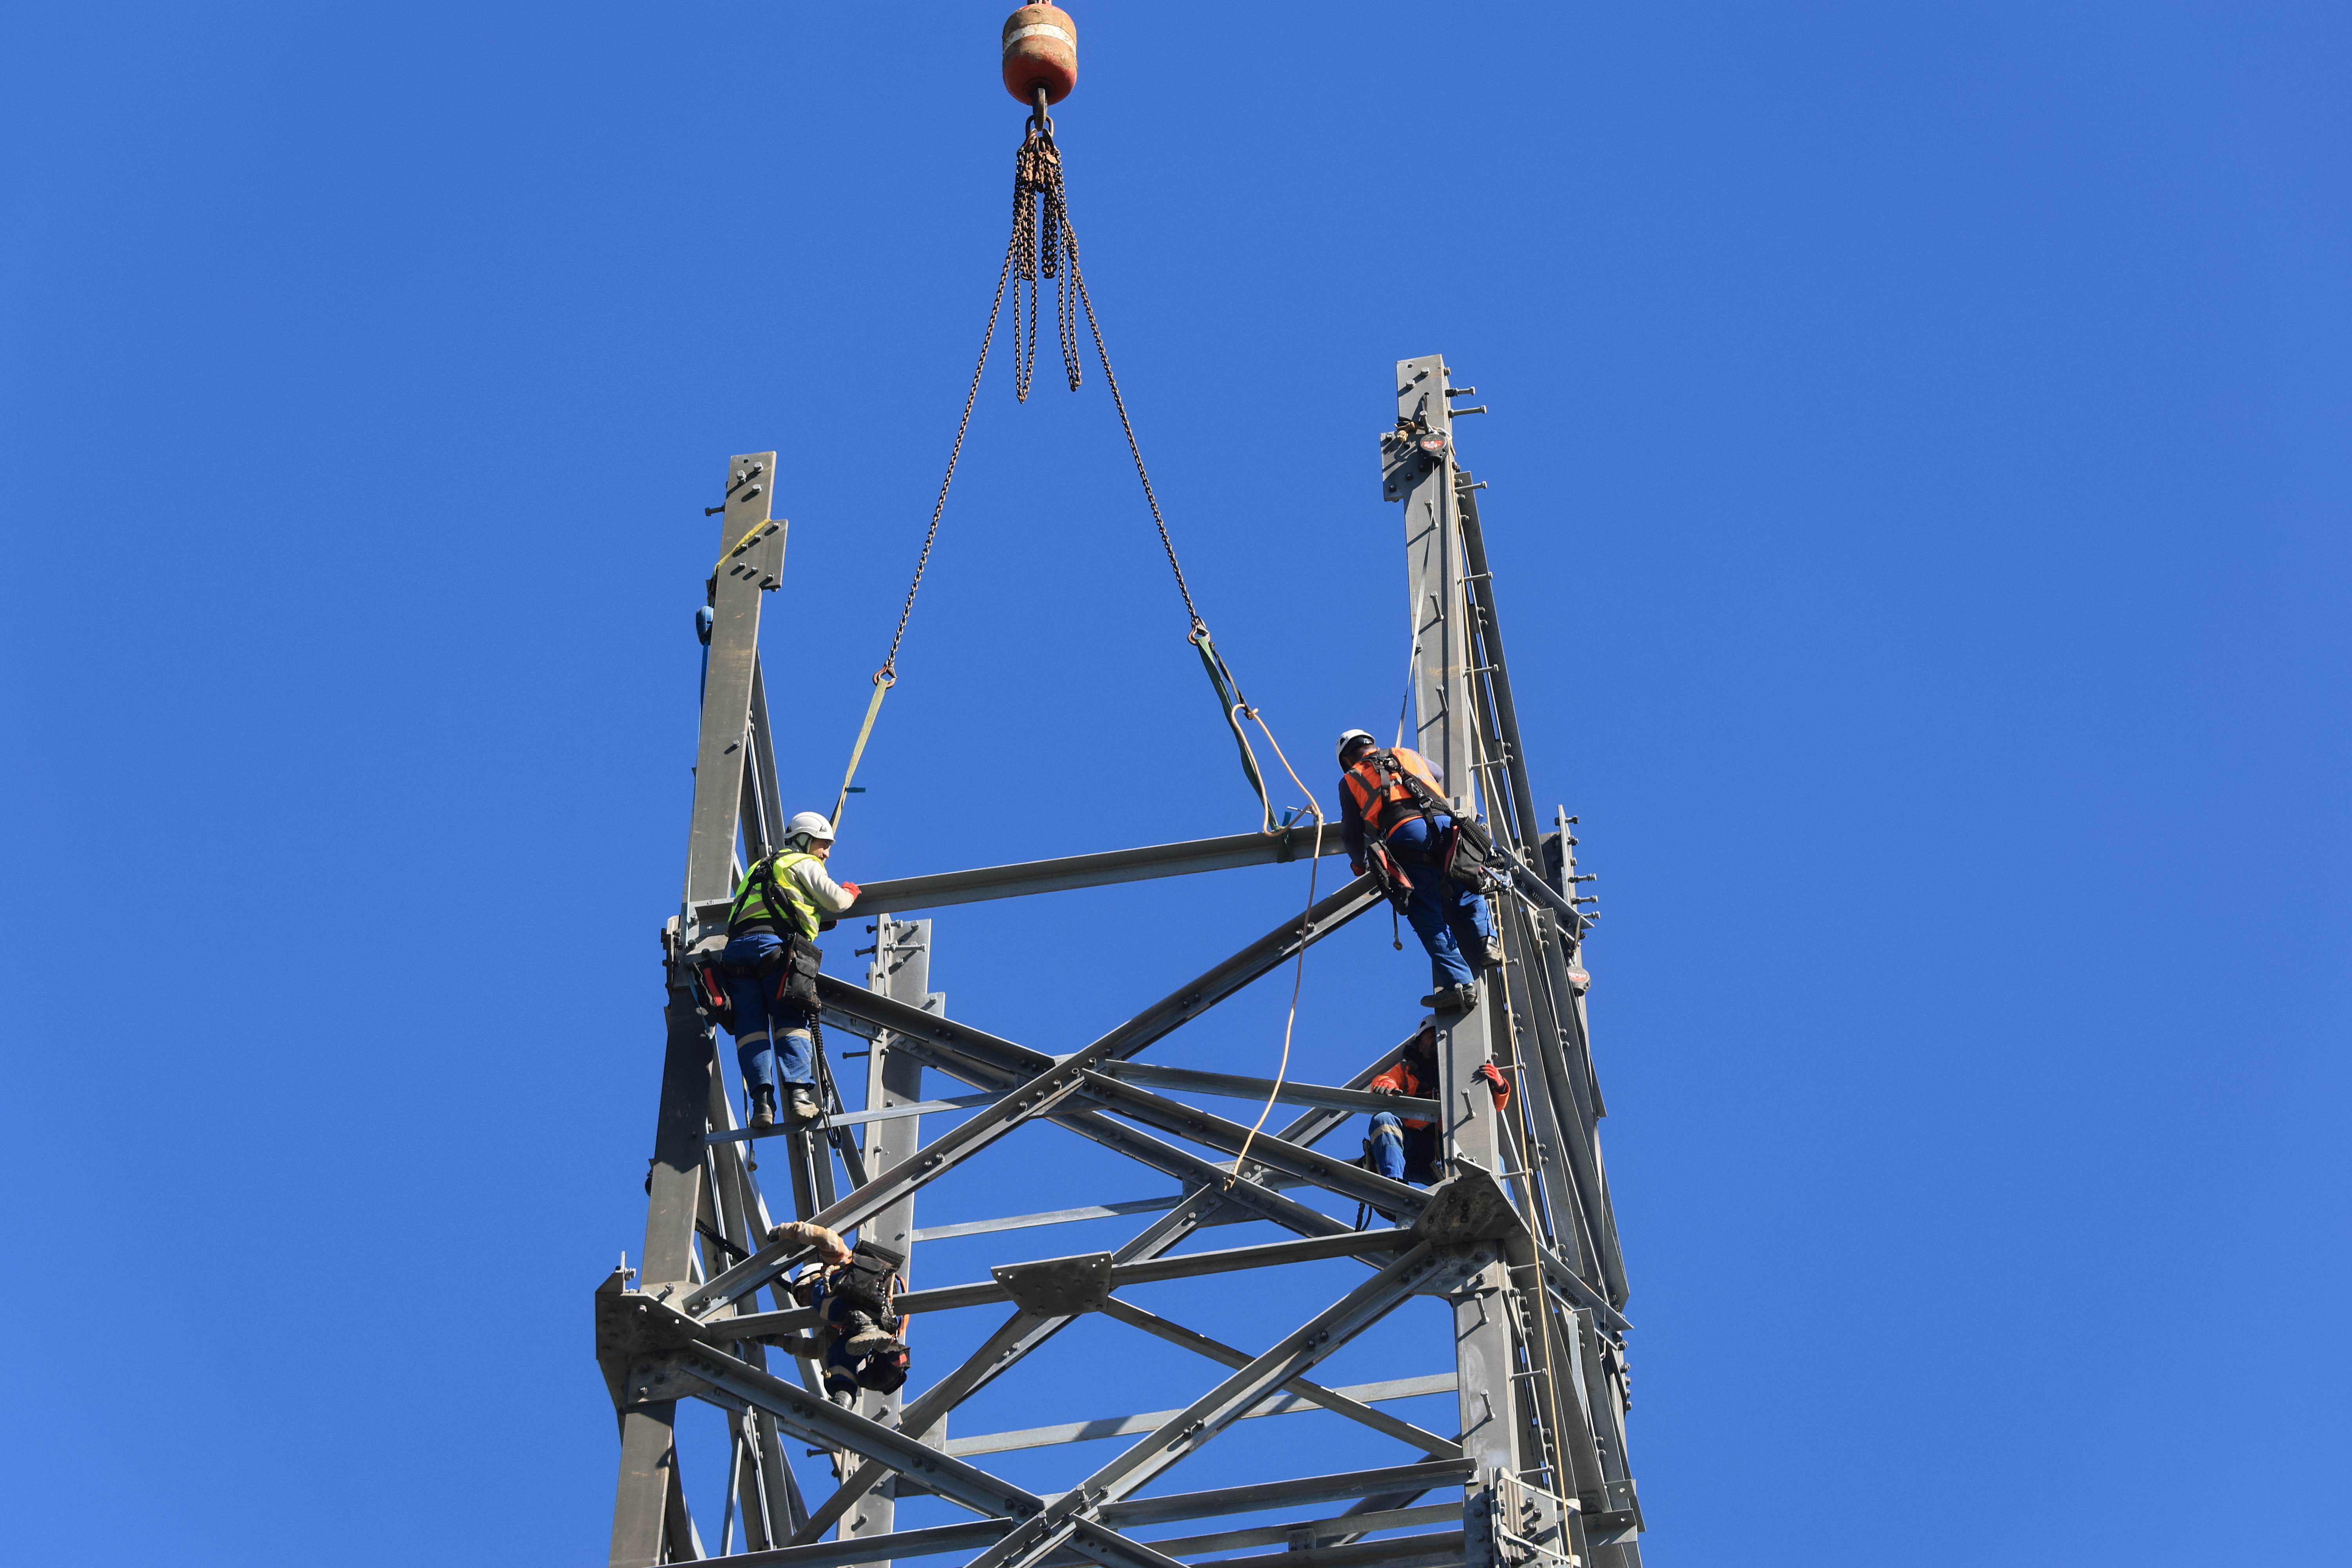 Workers set up a high-voltage power line for Amprion near Duesseldorf